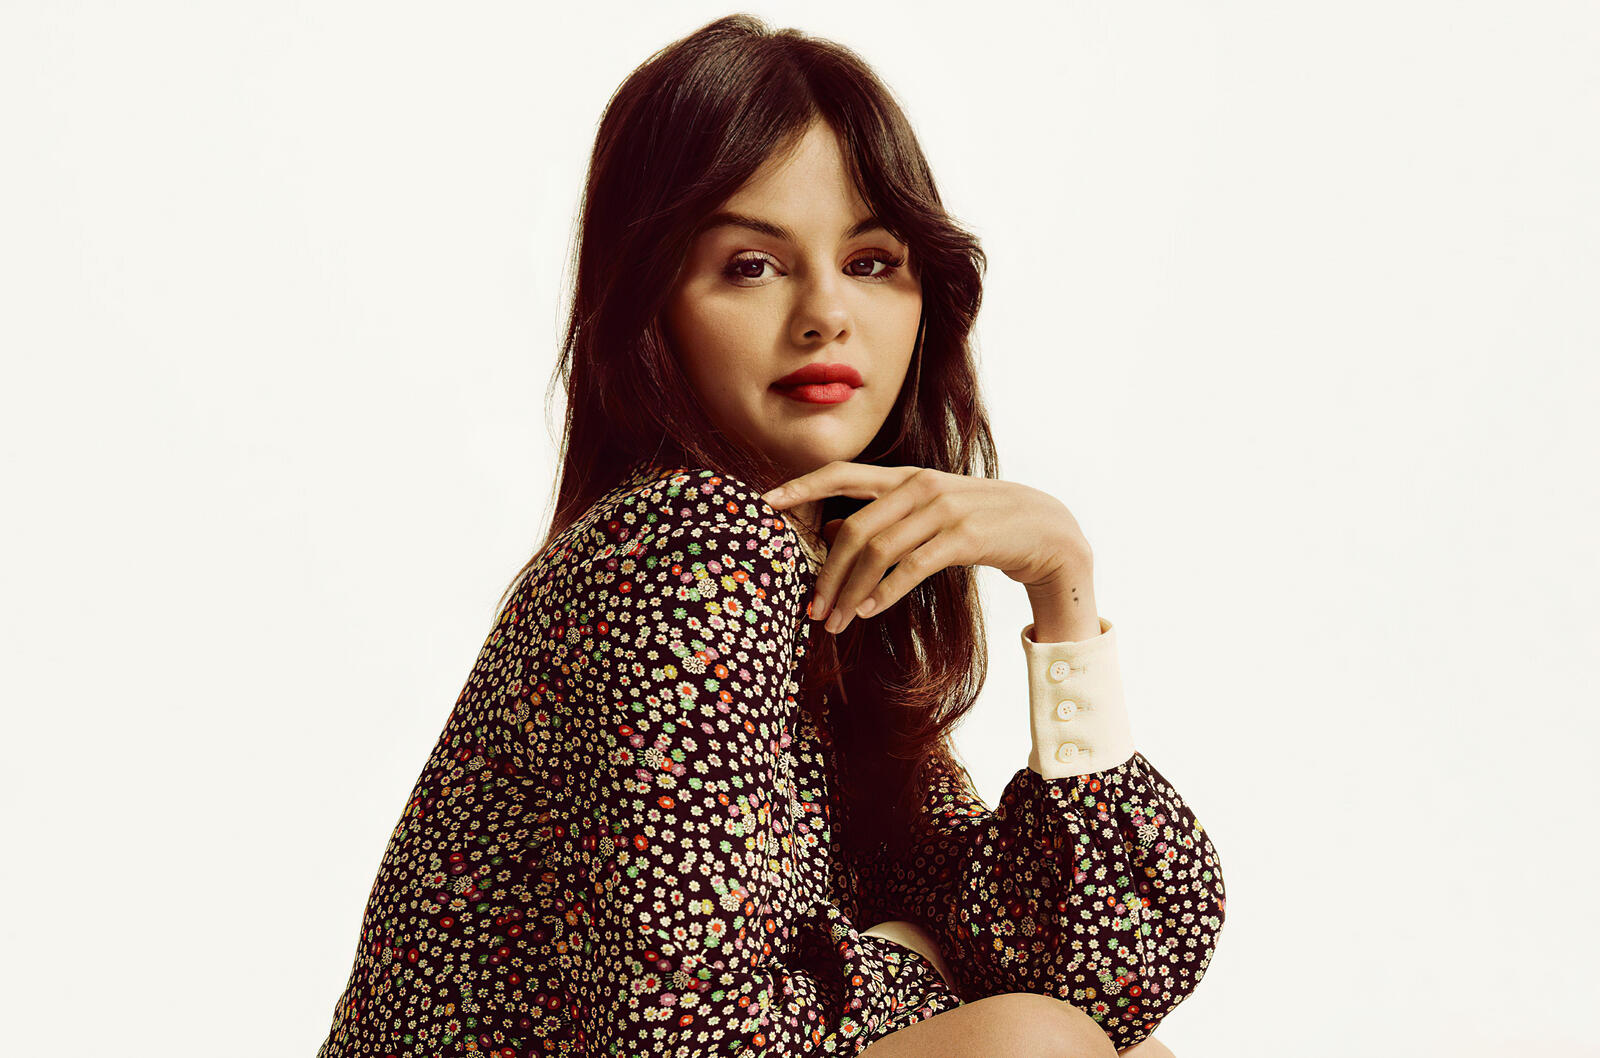 Wallpapers music Selena Gomez young on the desktop